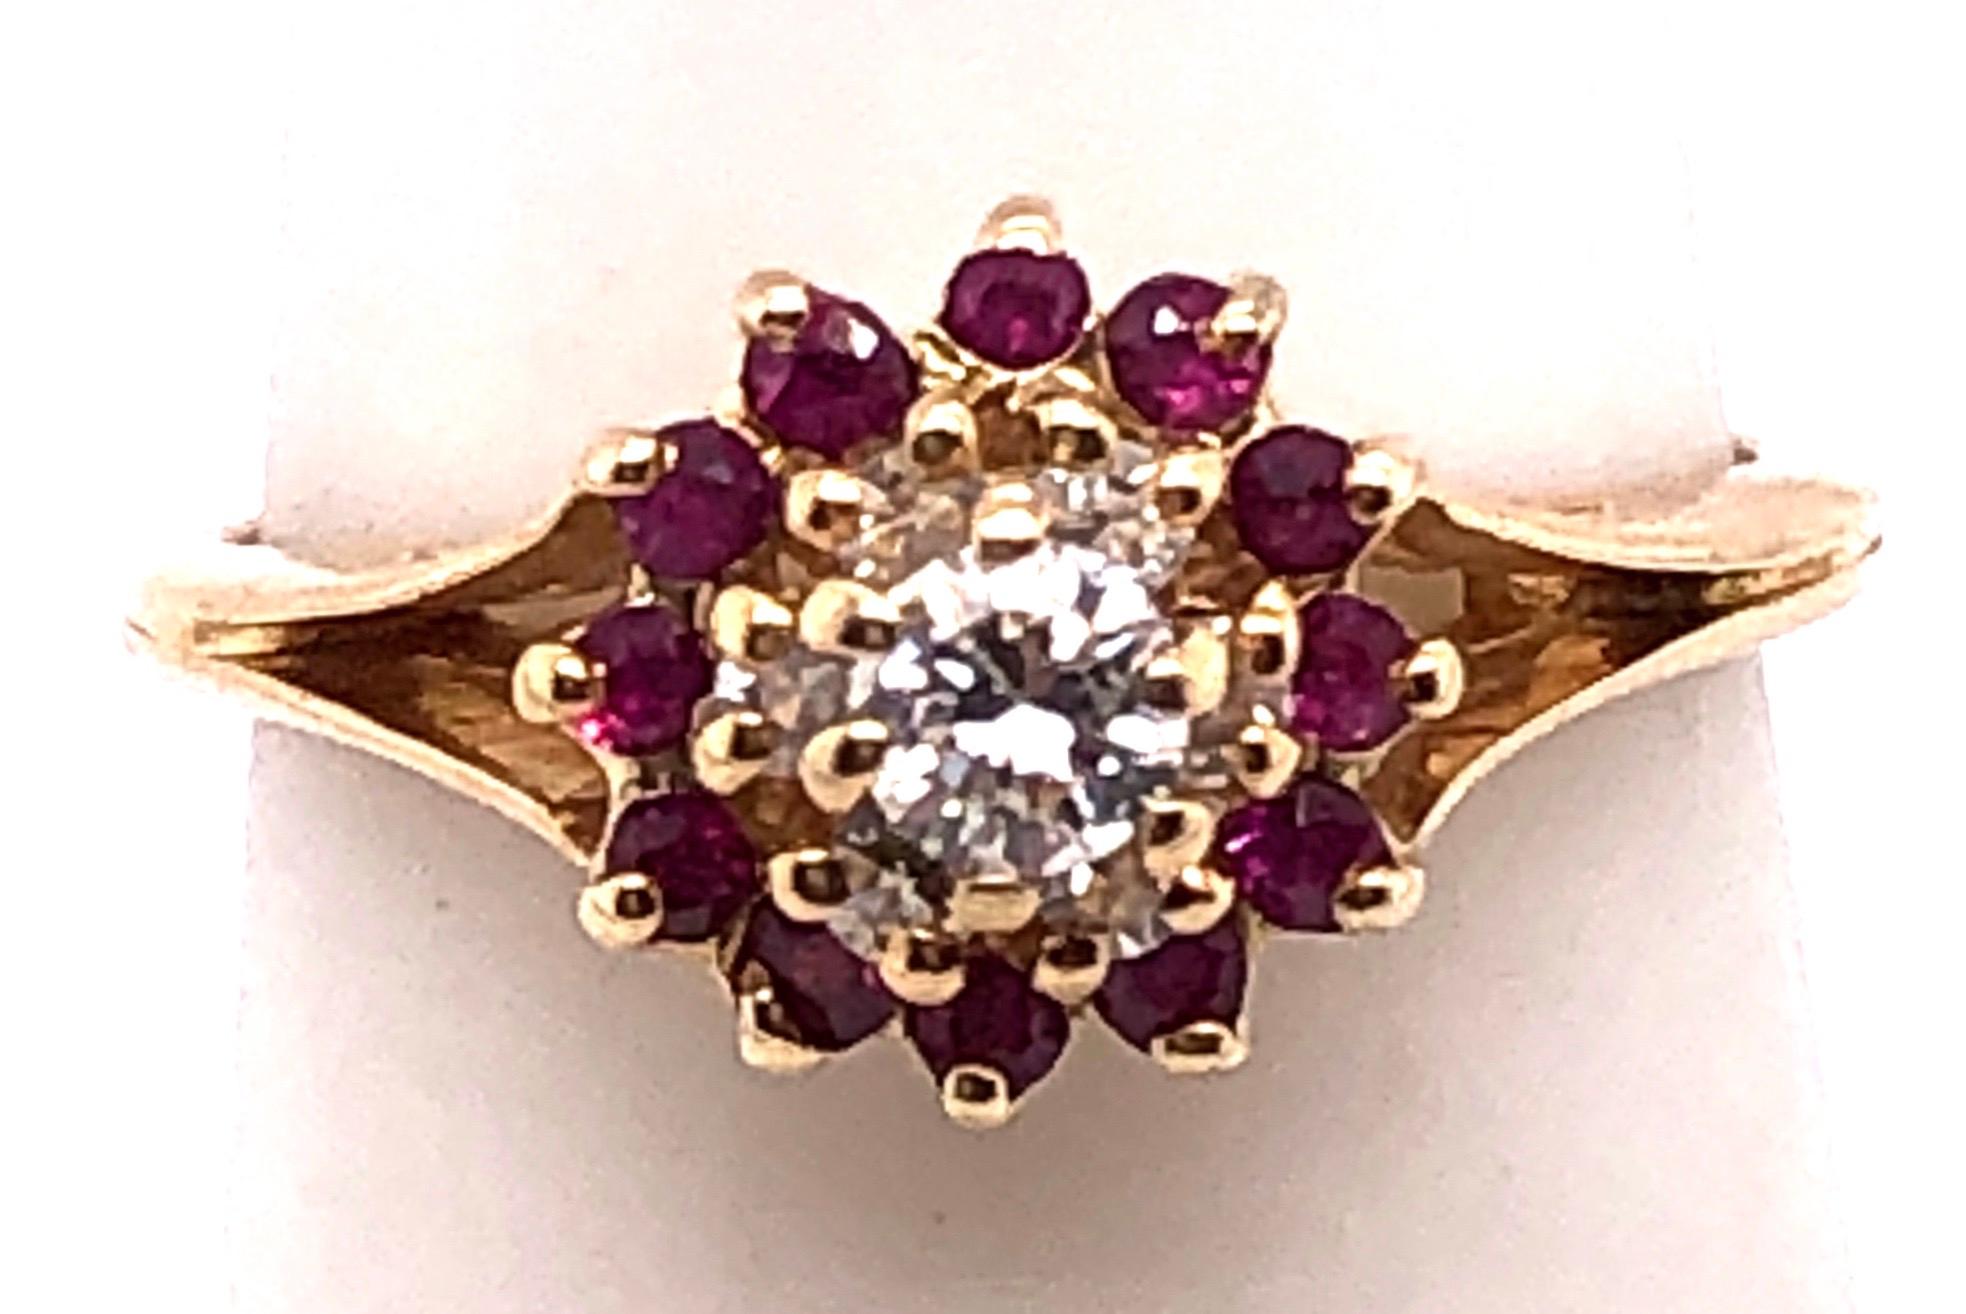 14 Karat Yellow Gold Contemporary Ring with Stones 0.20 Total Diamond Weight.
Size 6 
2.60 grams total weight.
